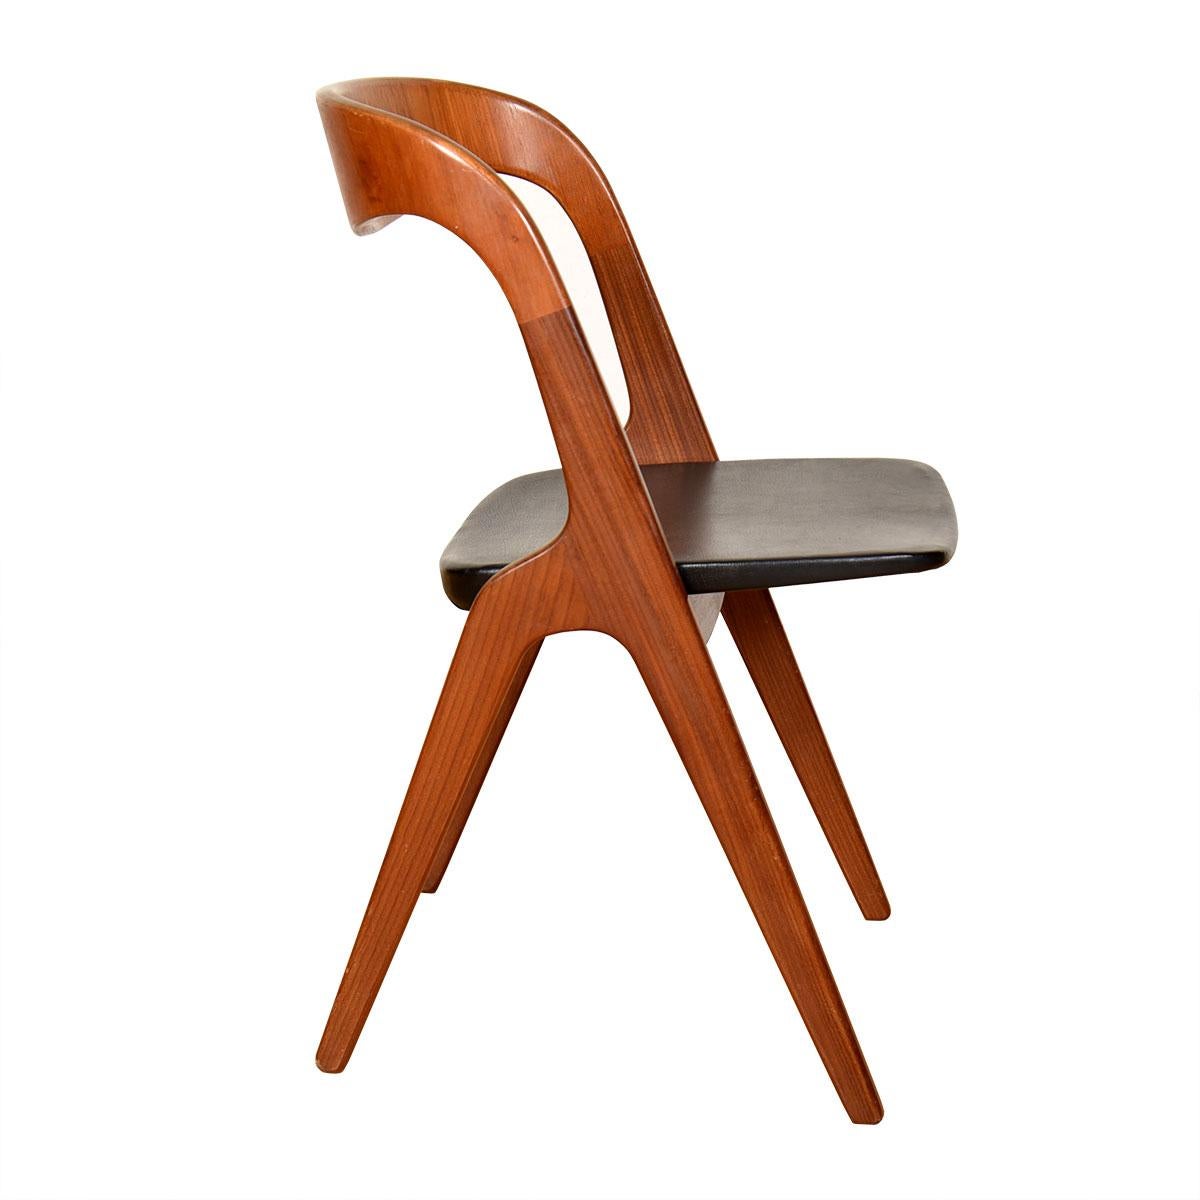 Vamo Sønderborg Danish Teak Accent Chair by Johannes Andersen

Additional information:
Material: Teak, Upholstery
Featured at DC
Extremely Scandinavian Modern accent chair.
Voluptuous curves and graceful lines make this a chair to be